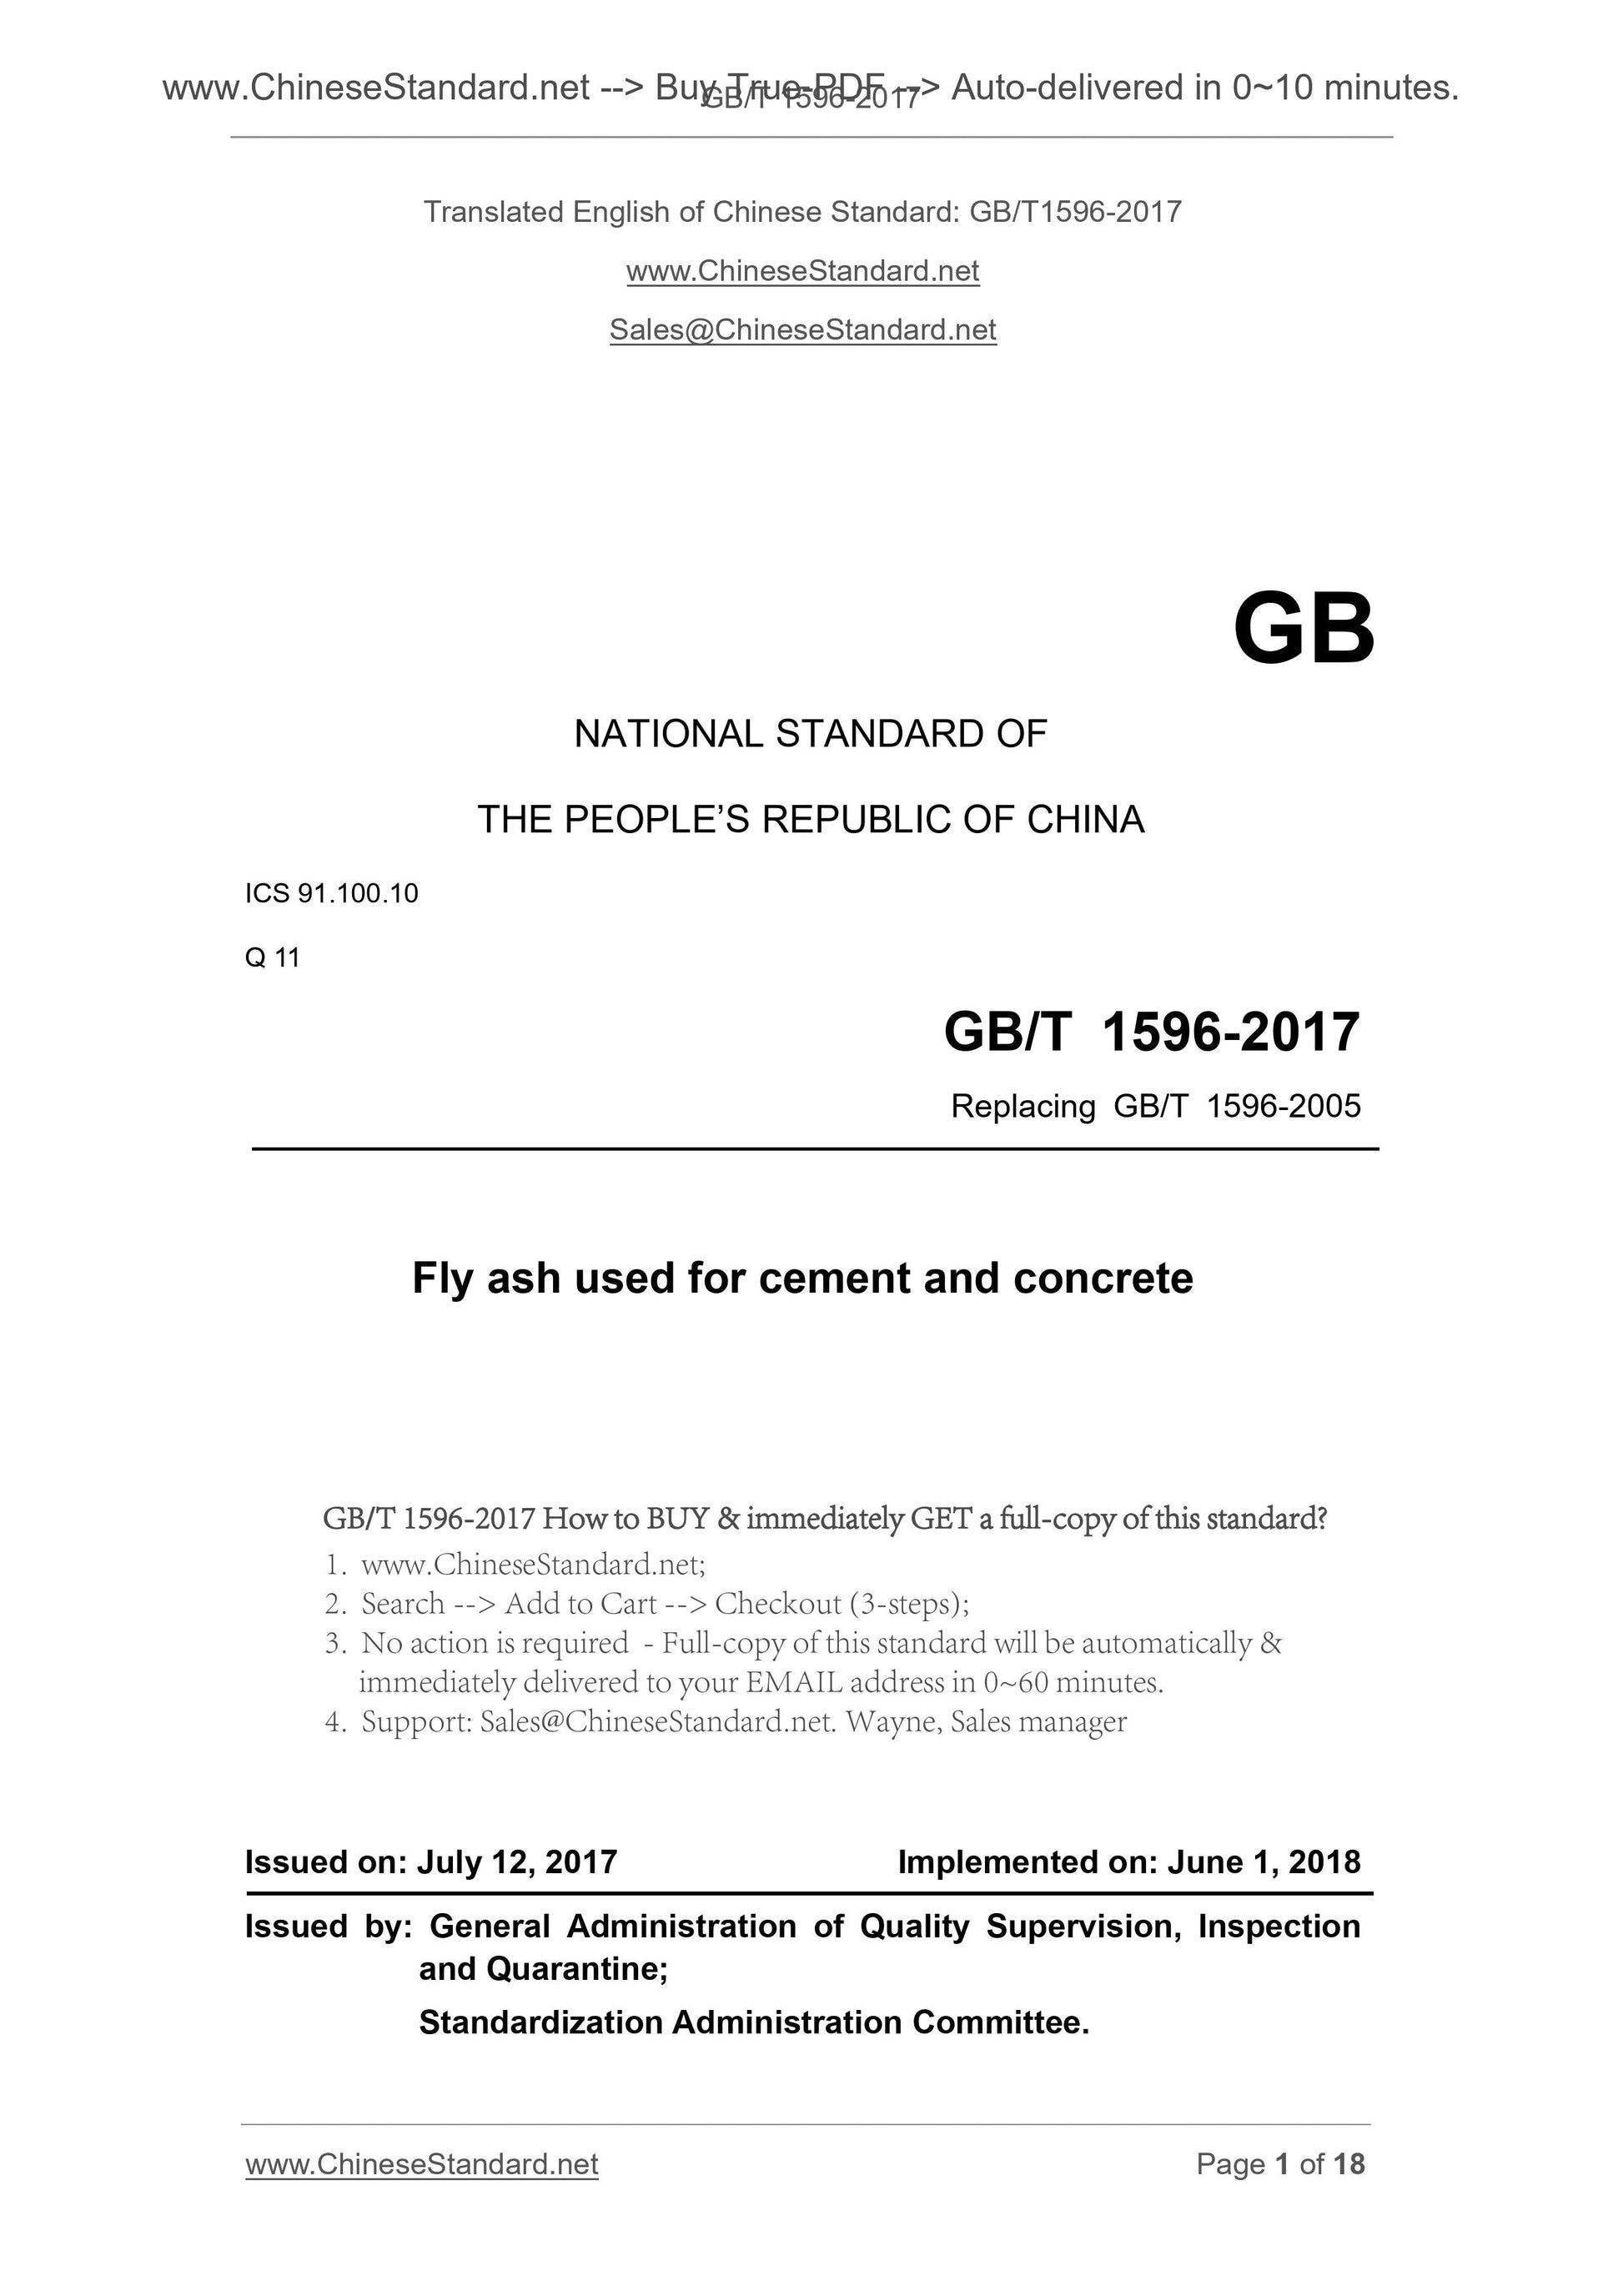 GB/T 1596-2017 Page 1